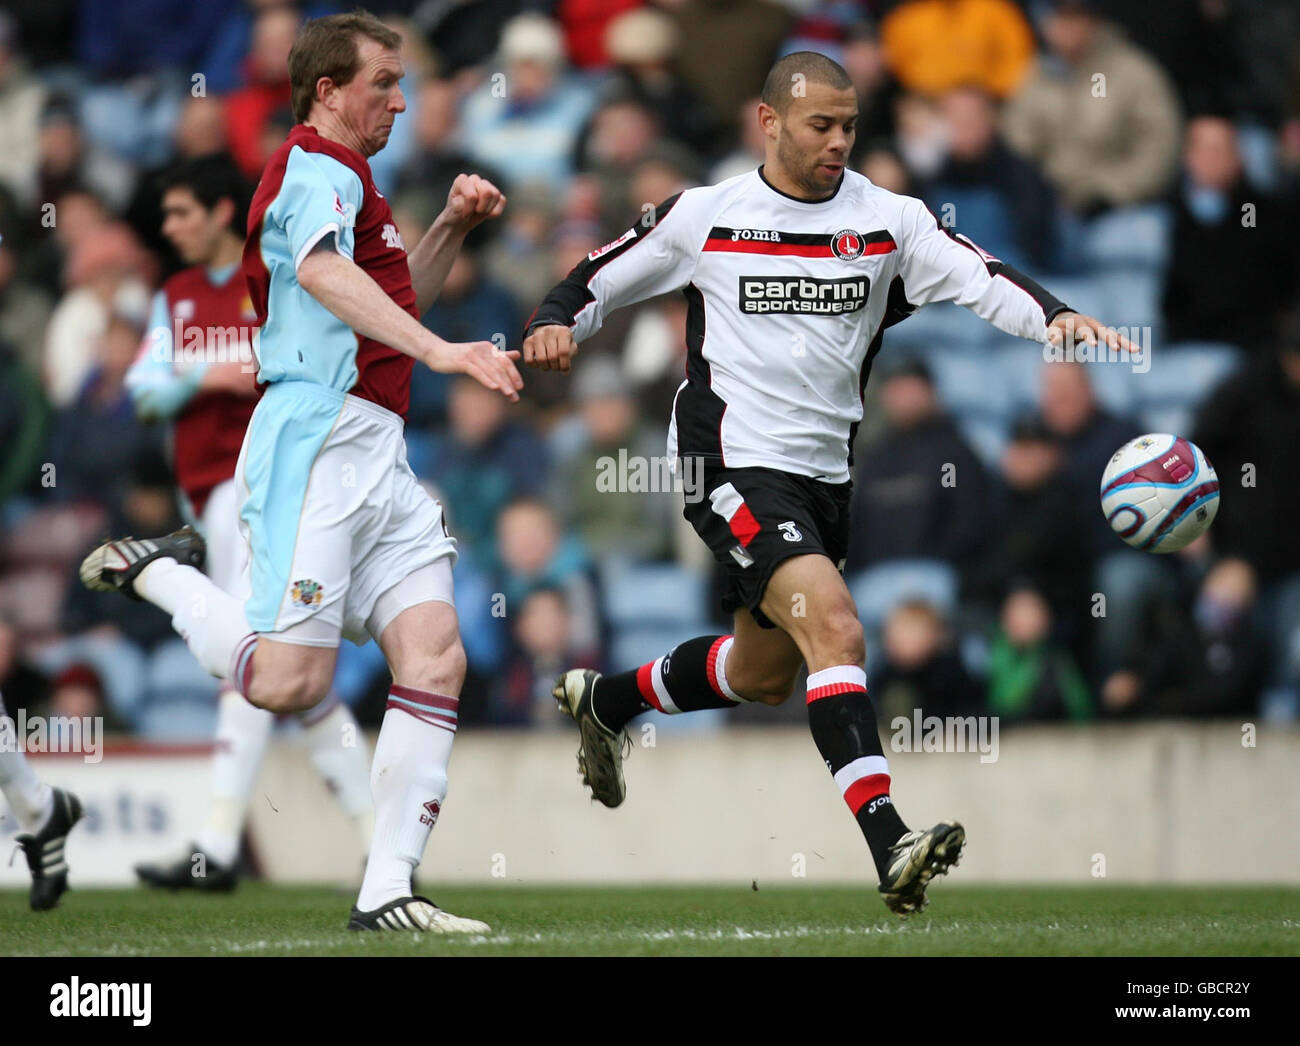 Burnley's Stephen Caldwell and Charlton Athletic's Deon Burton during the Coca-Cola Championship match at Turf Moor, Burnley. Stock Photo